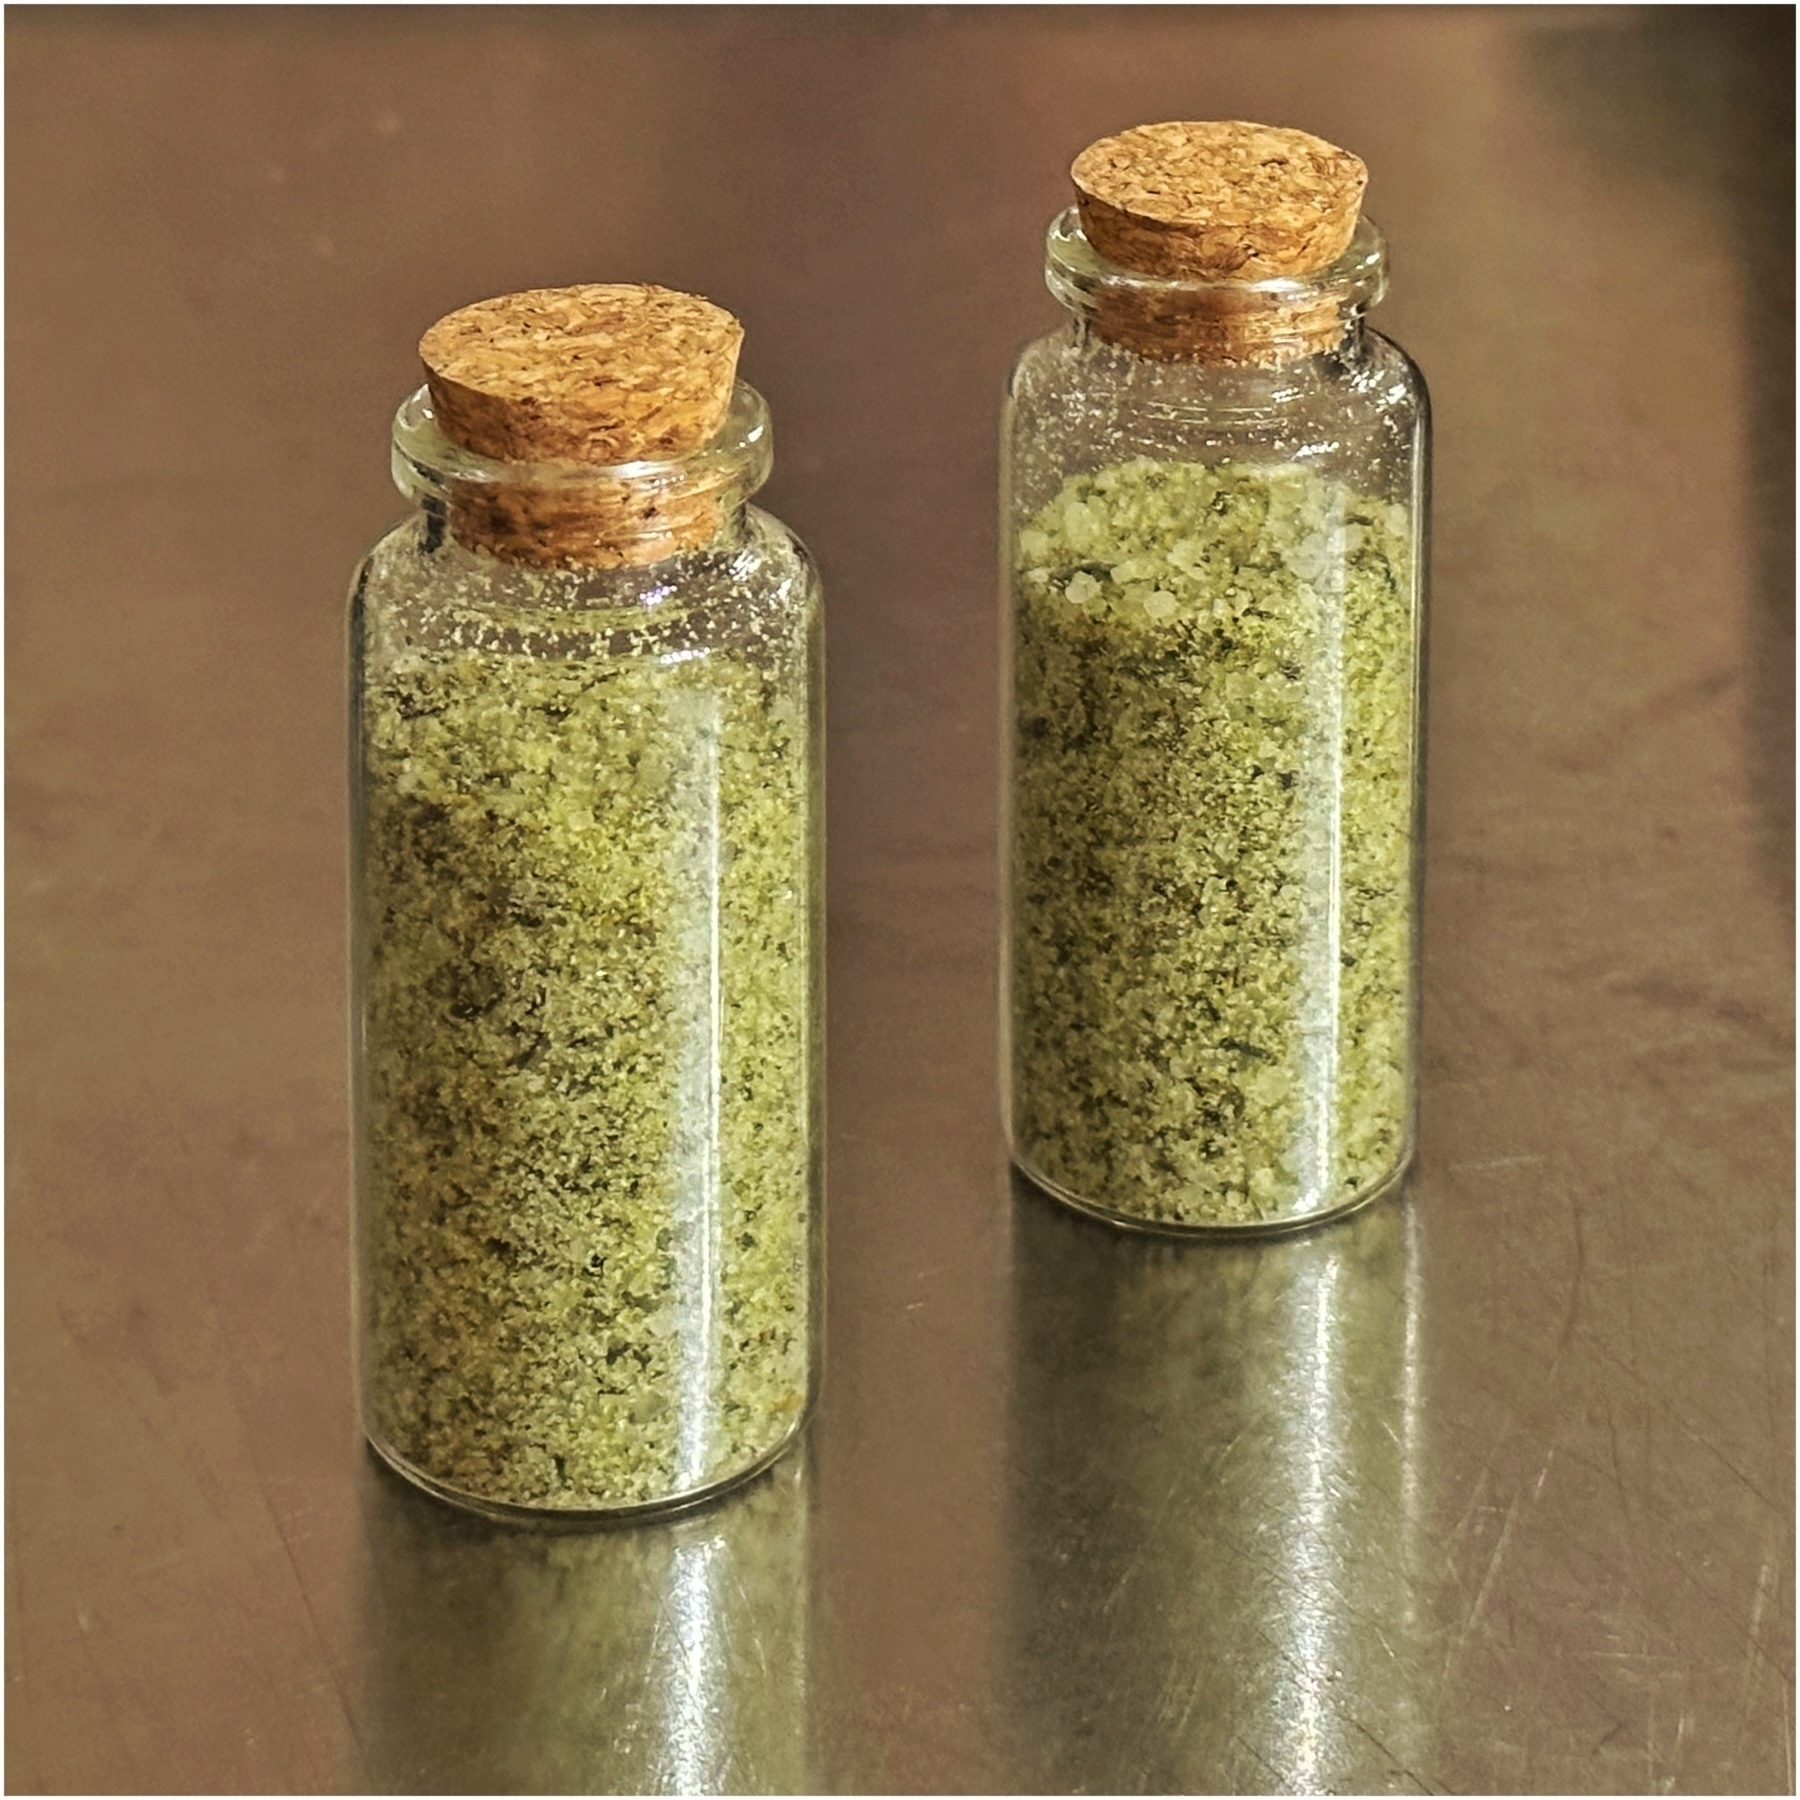 Two glass bottles with cork stoppers filled with a green herbal substance, possibly a spice or seasoning, standing on a metallic surface.